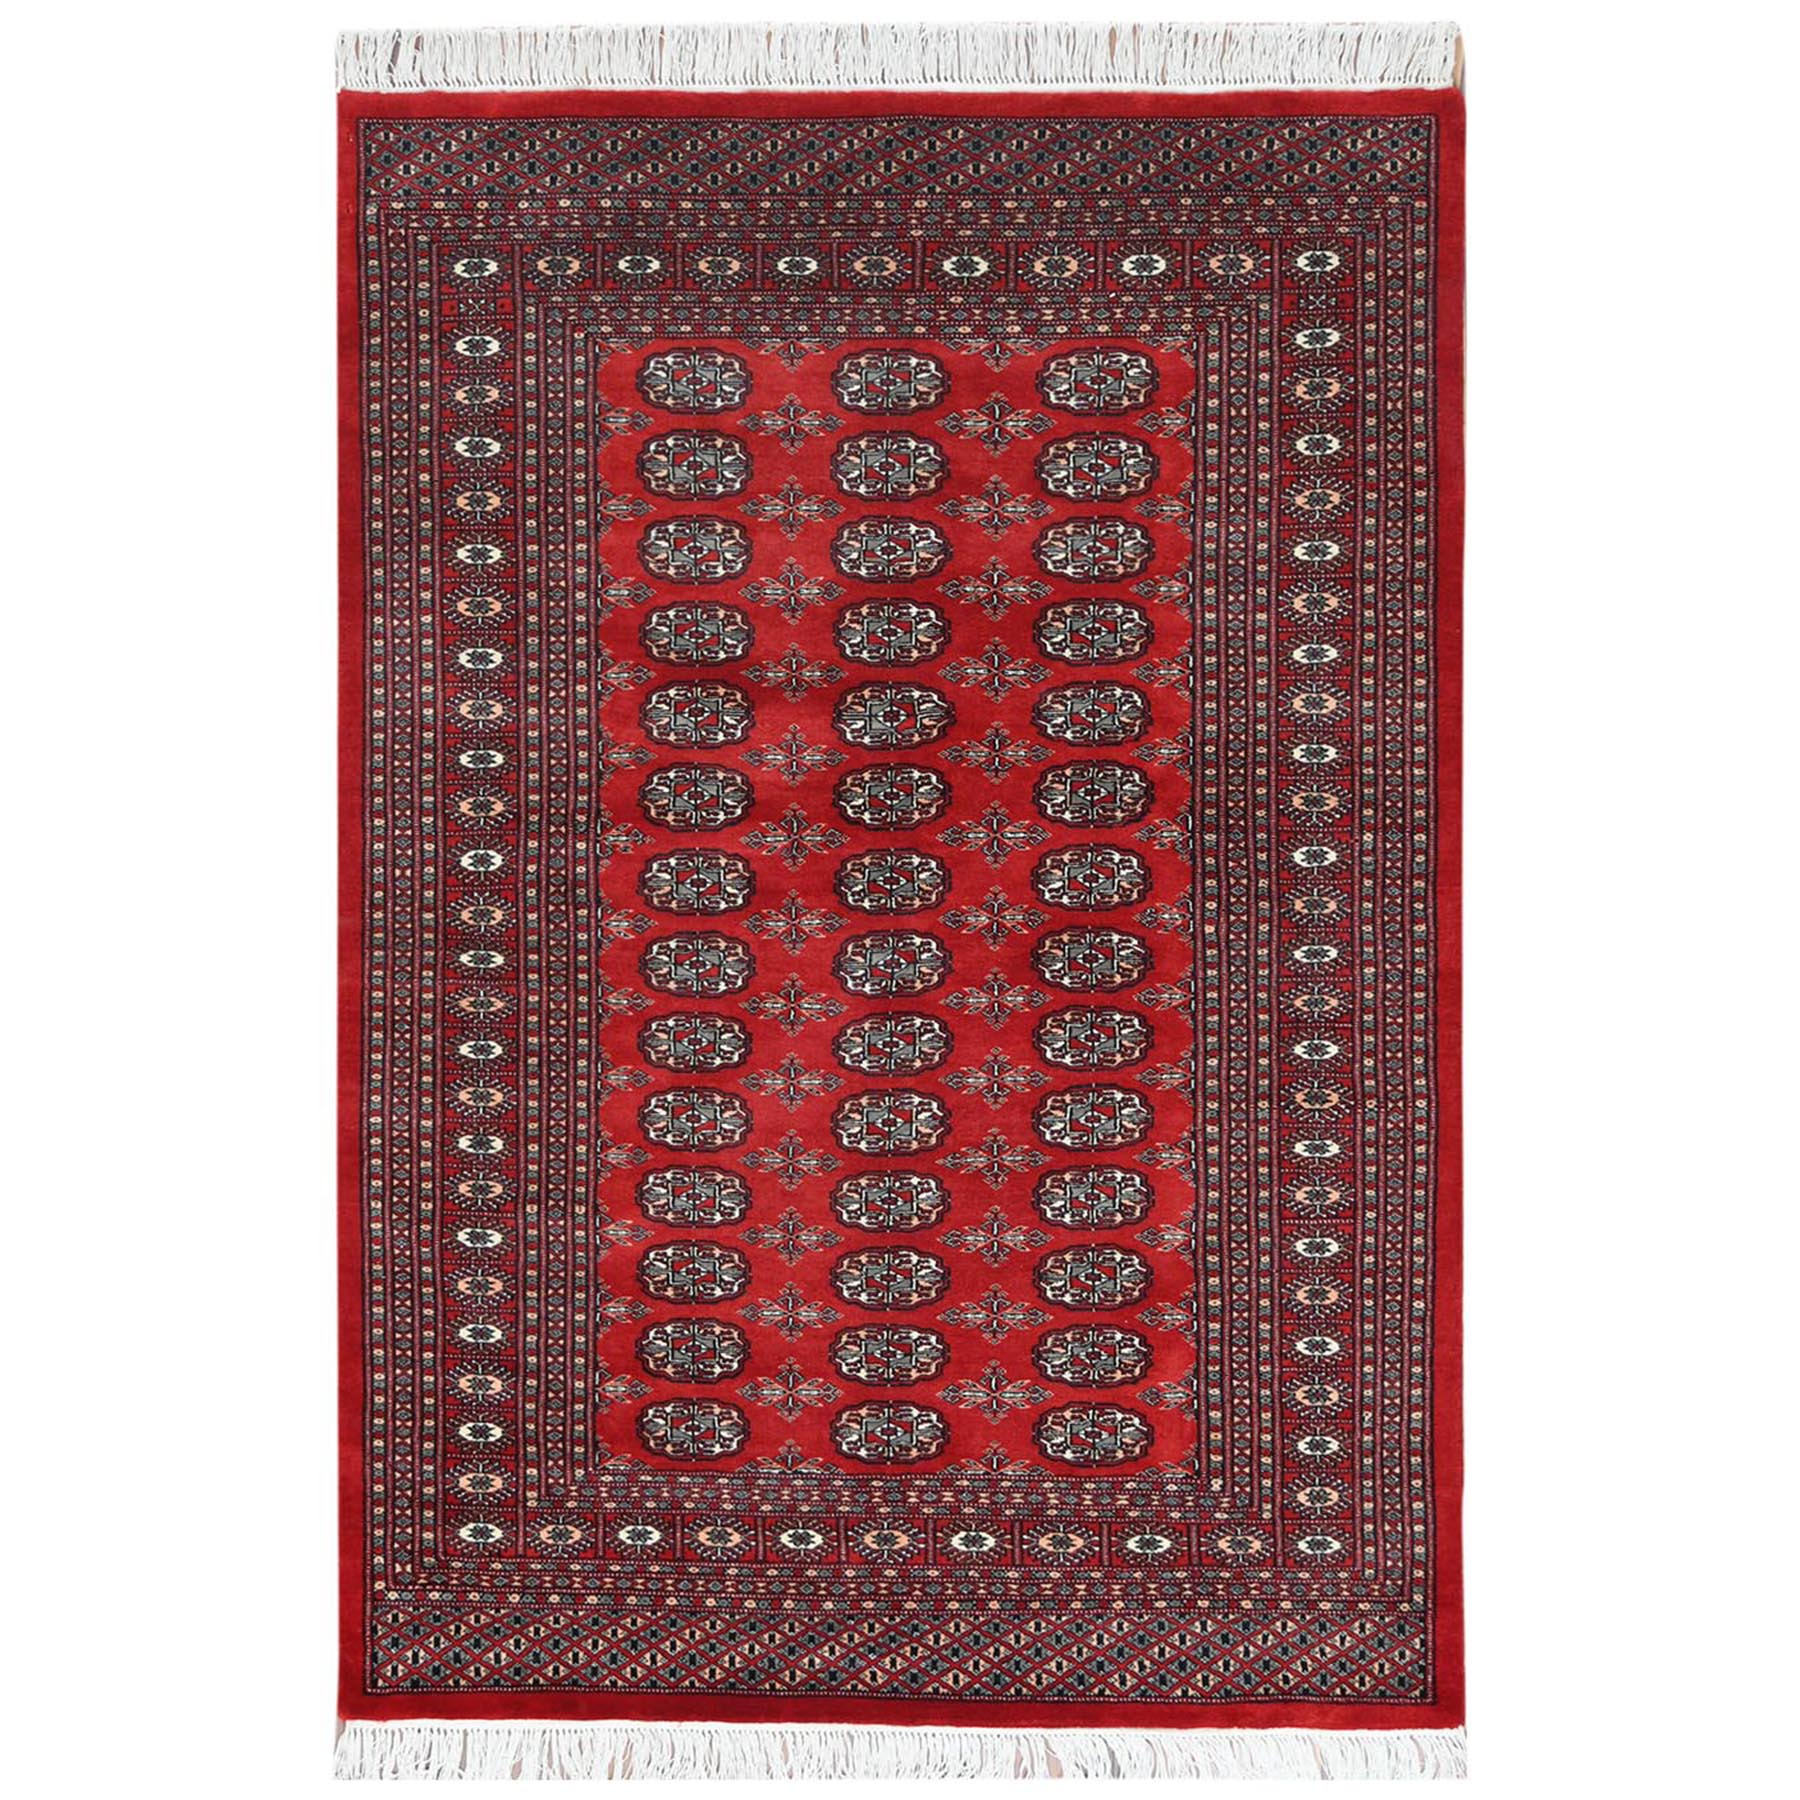 Nomadic And Village Collection Hand Knotted Red Rug No: 1122734